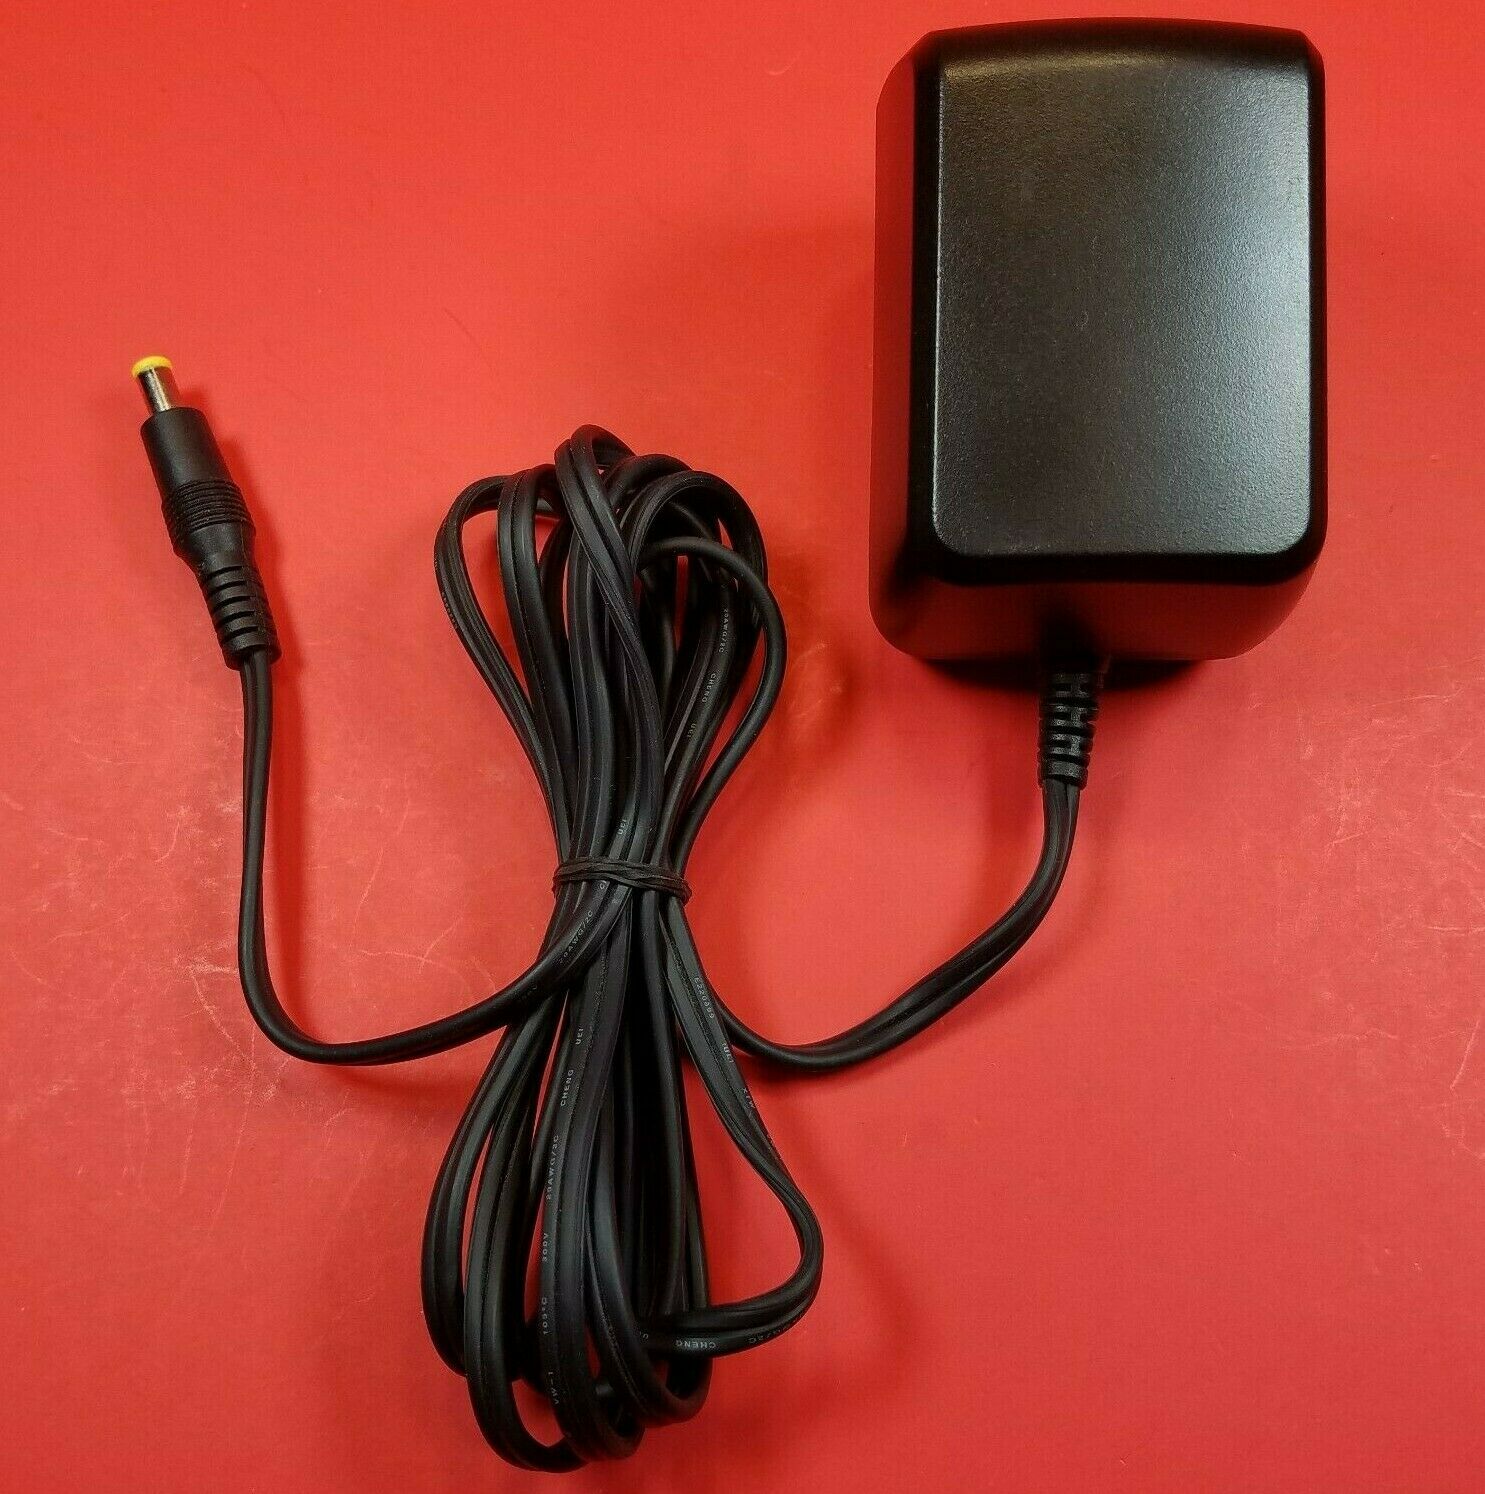 Genuine FOXLINK FA-4A030-1 Power Supply Adaptor 12V - 500mA OEM AC/DC Adapter Type: AC Adapter Output Voltage: 12 V Fe